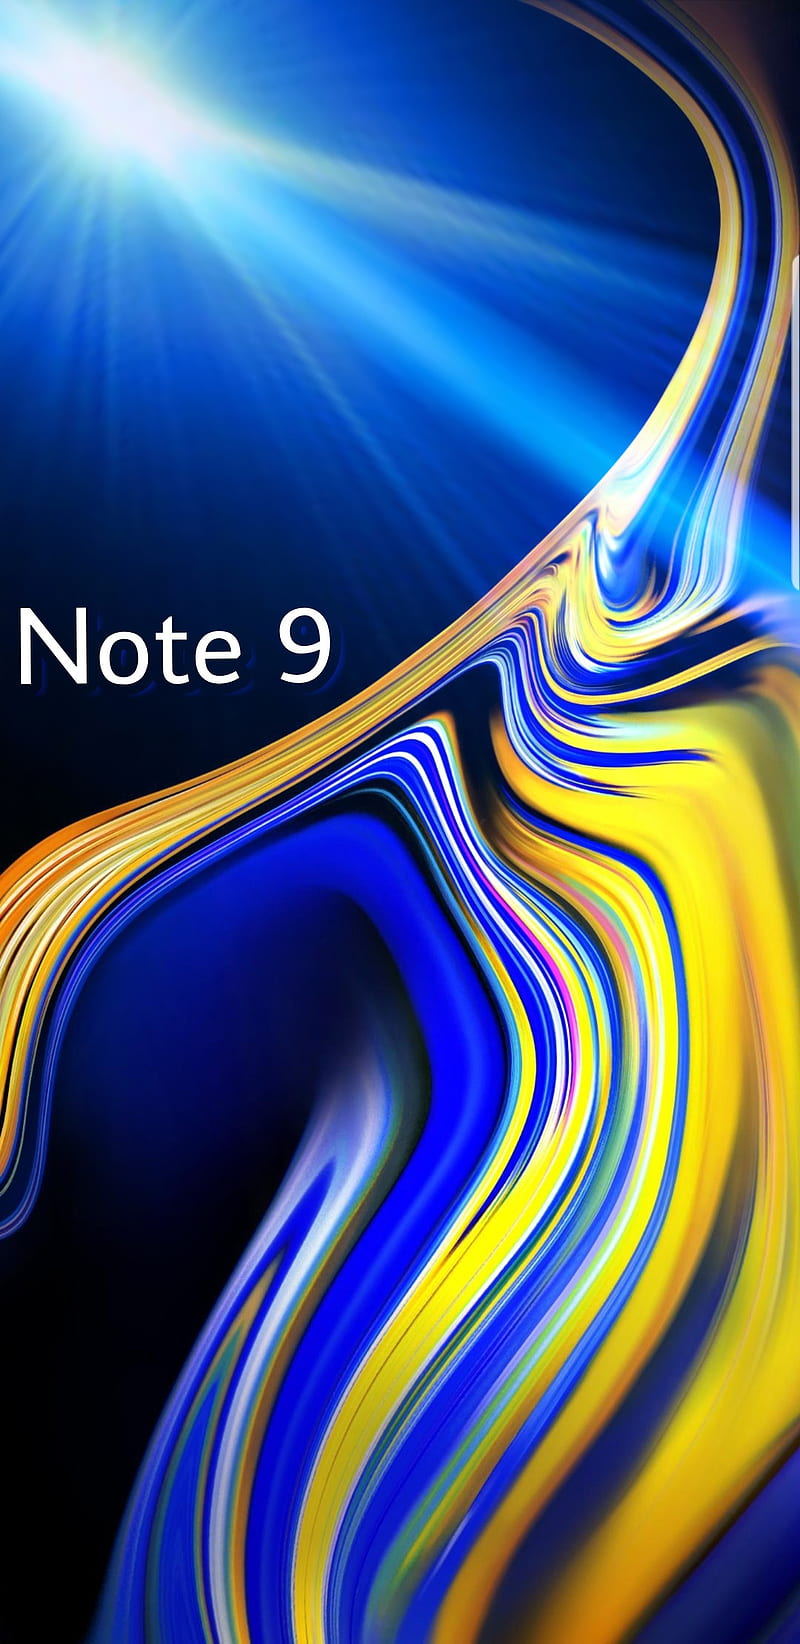 Note 9 Design2, blue, galaxy, gold, new, note, note 9, samsung, HD phone wallpaper